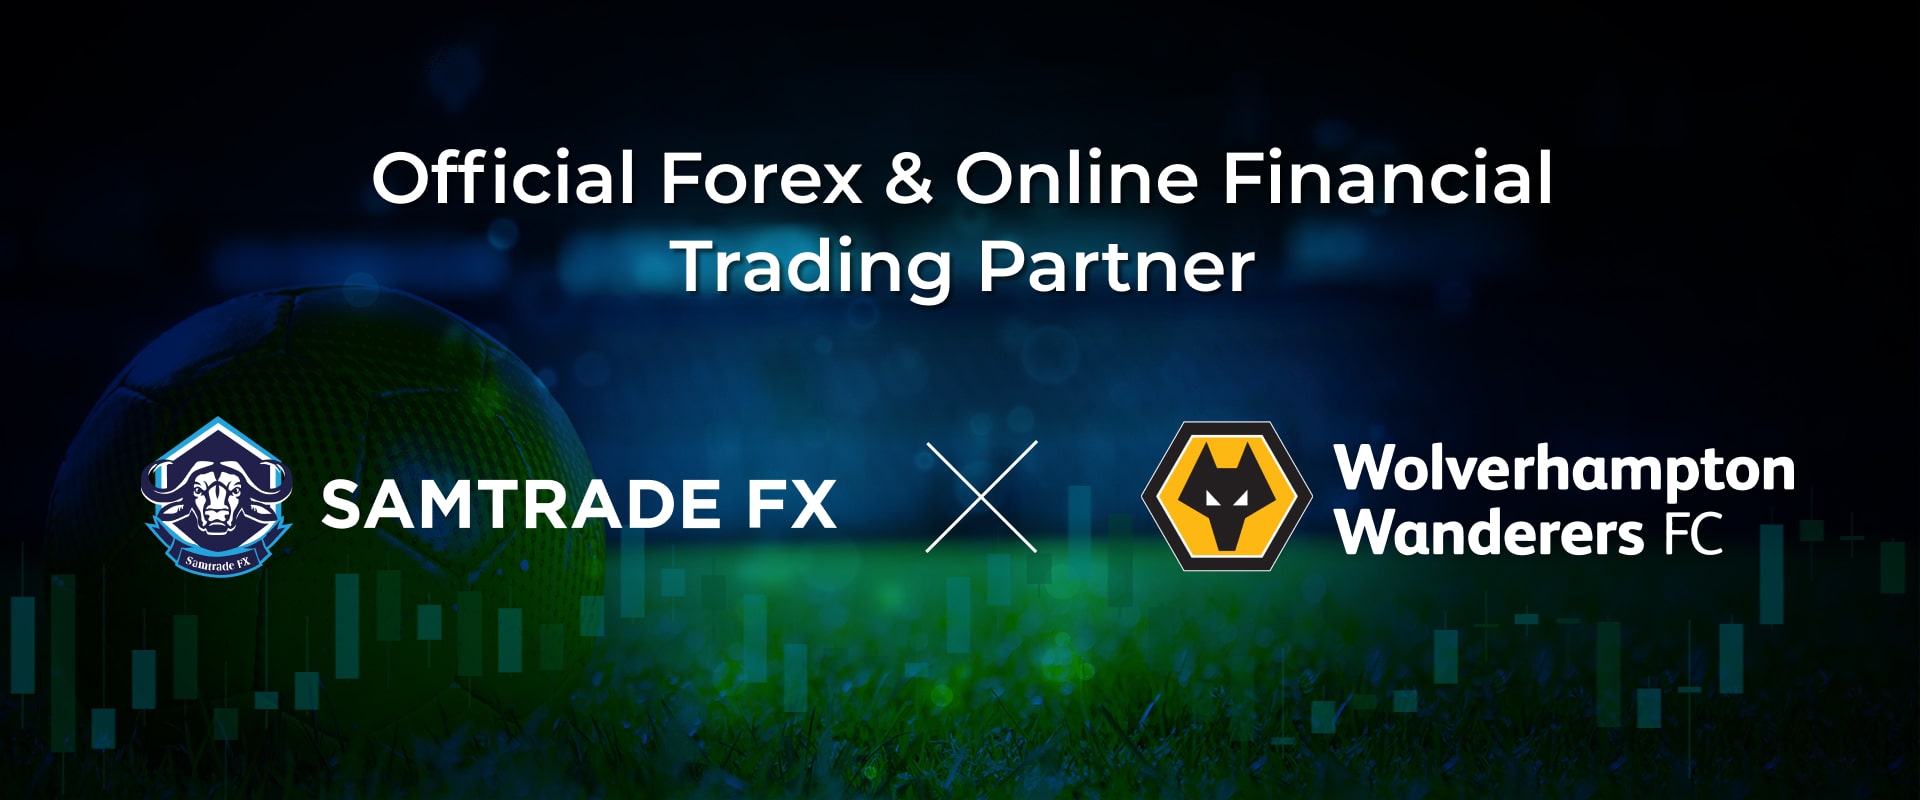 SAMTRADE FX SIGNS SPONSORSHIP DEAL WITH EPL TEAM WOLVERHAMPTON WANDERERS FC